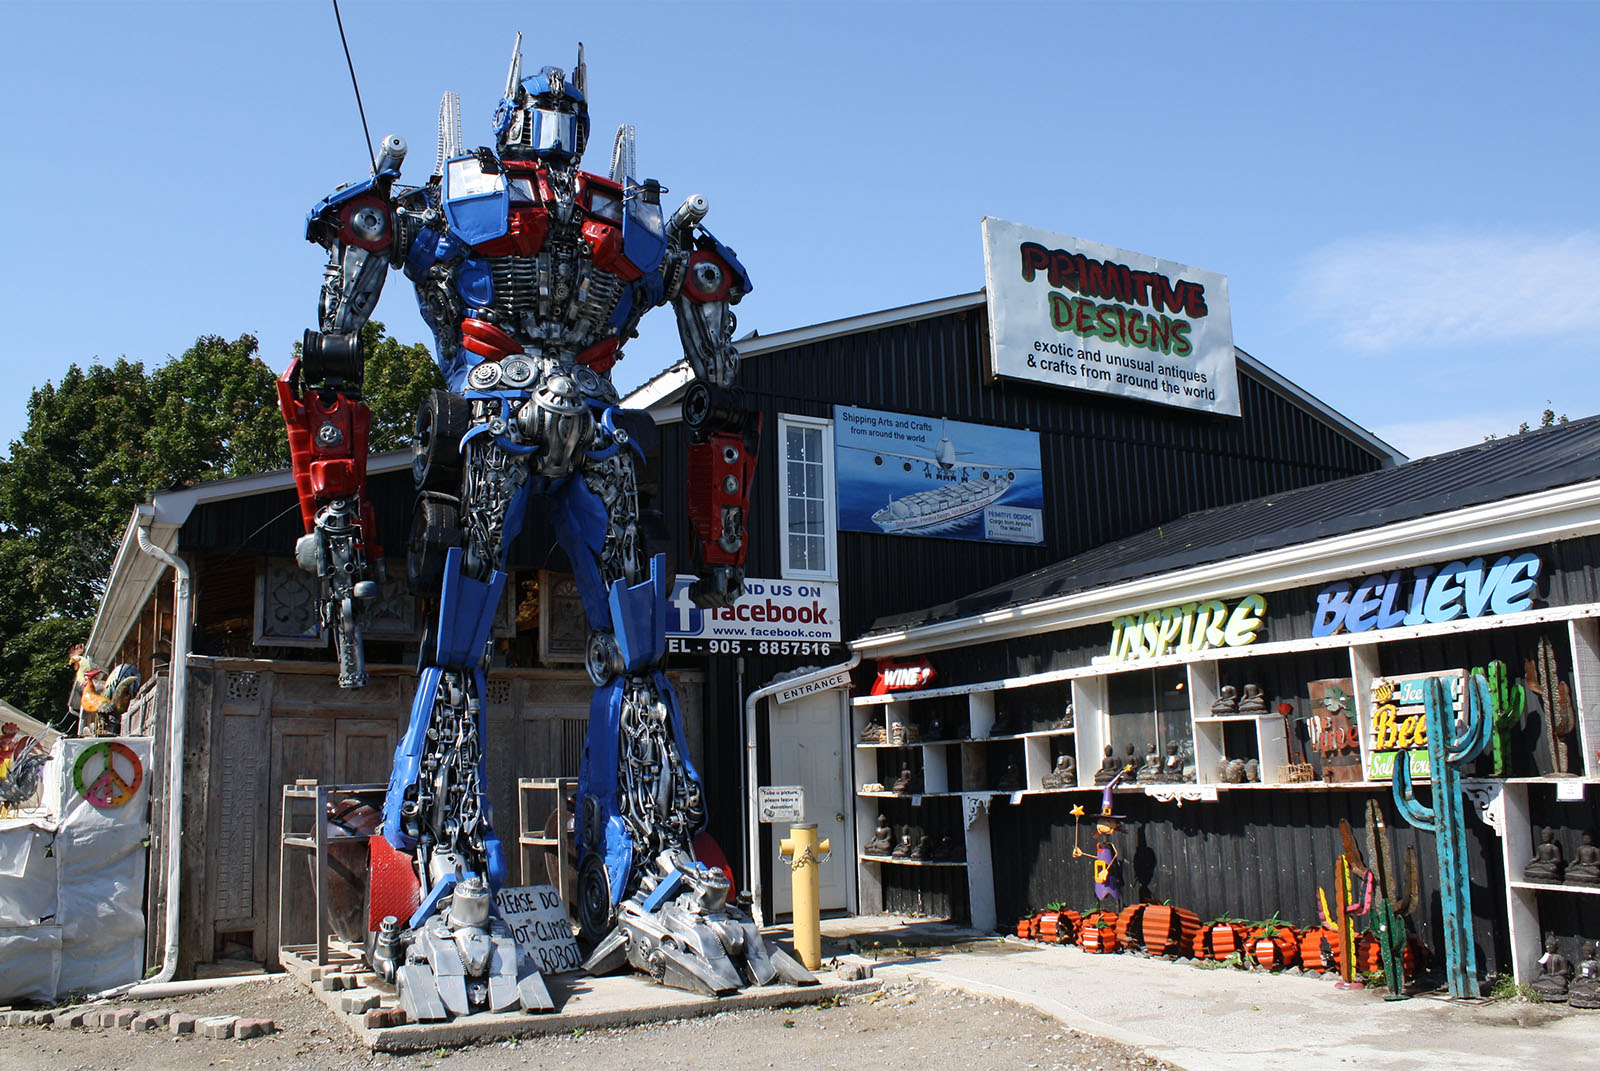 A large metal robot sculpture in front of a barn